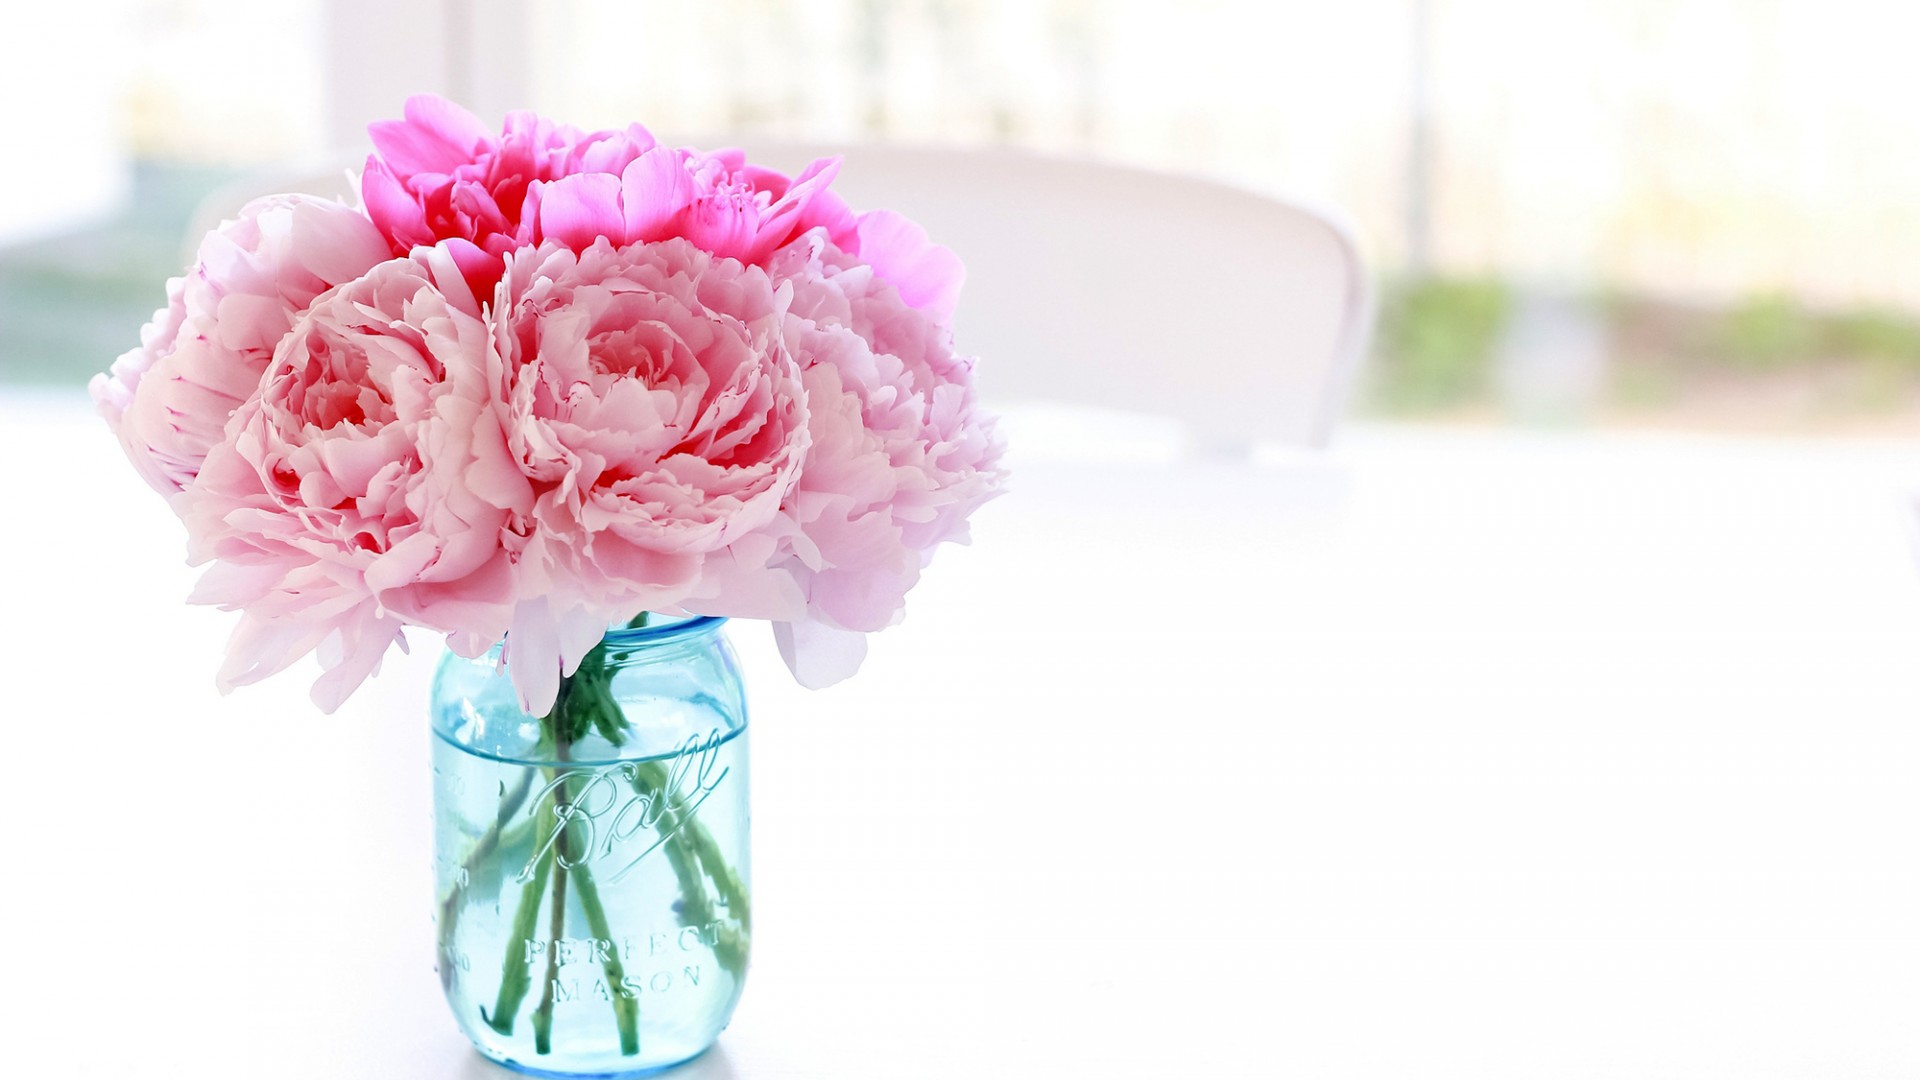 Wedding Peony Bouquet Wallpaper Pictures To Pin